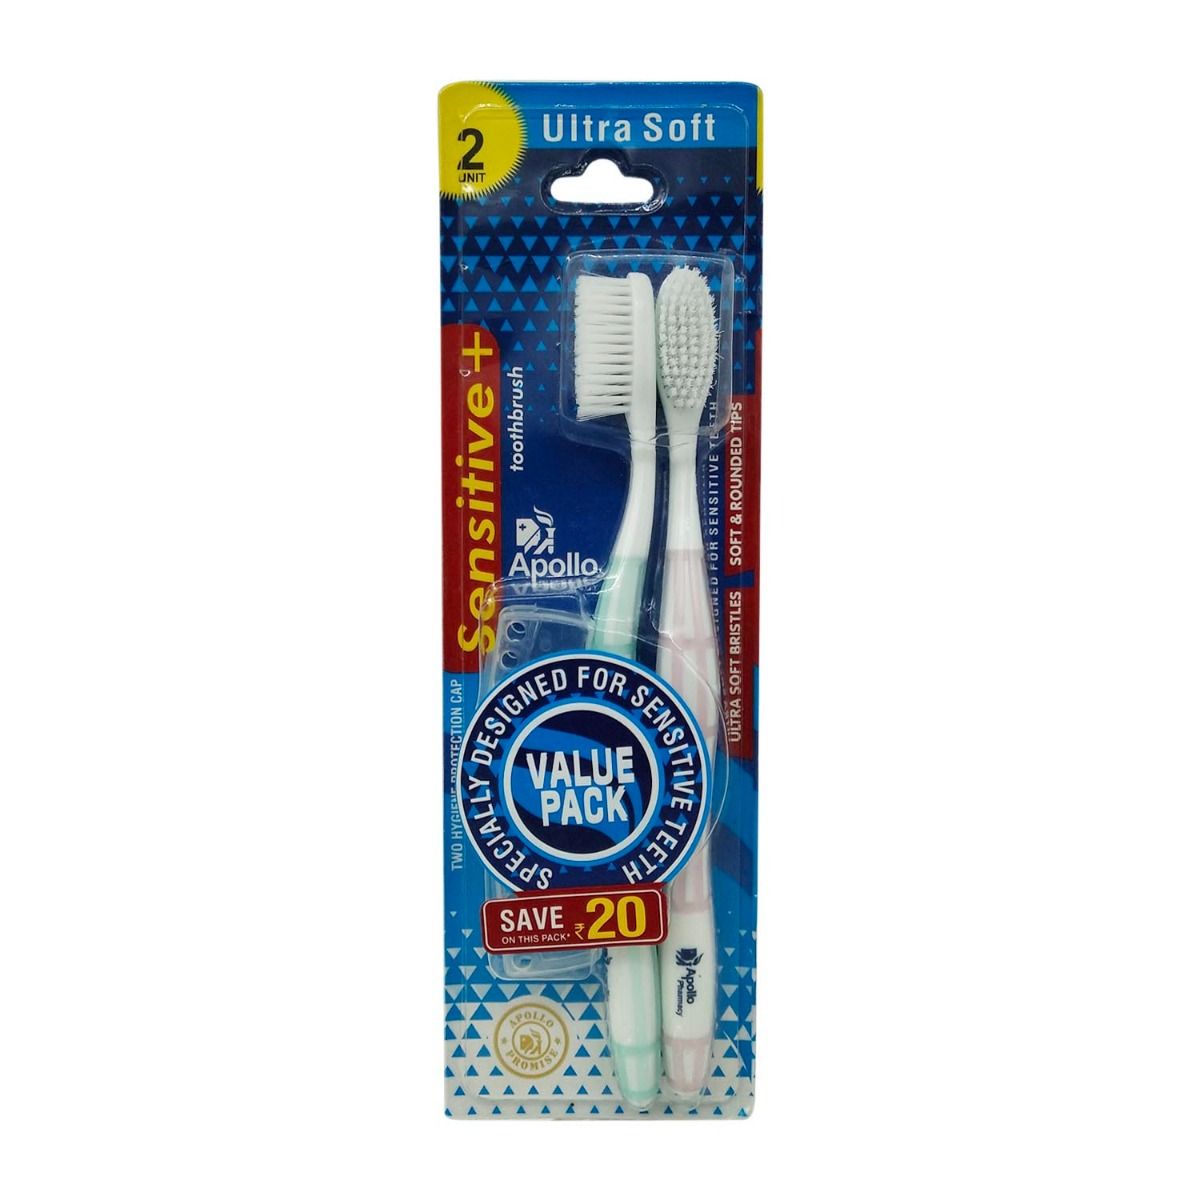 Buy Apollo Pharmacy Value Pack Sensitive Plus Toothbrush, 2 Count Online